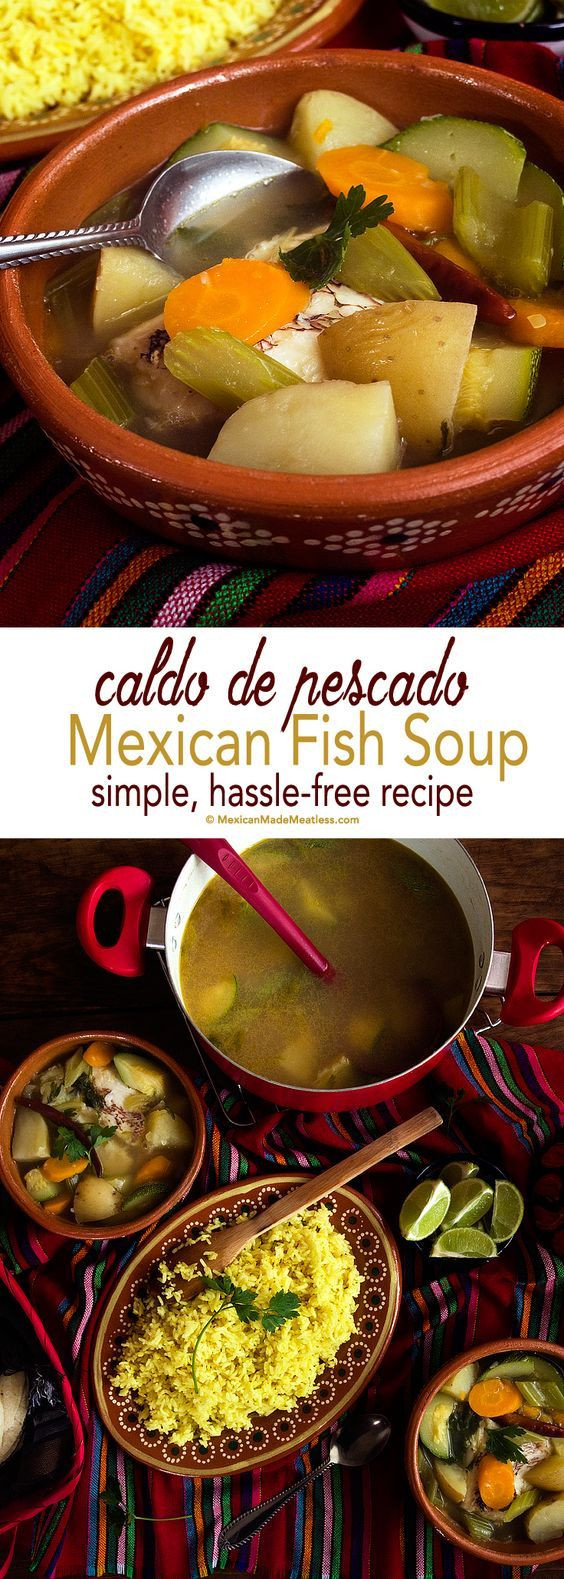 Mexican Fish Soup Recipes
 Simple Hassle Free Mexican Fish Soup